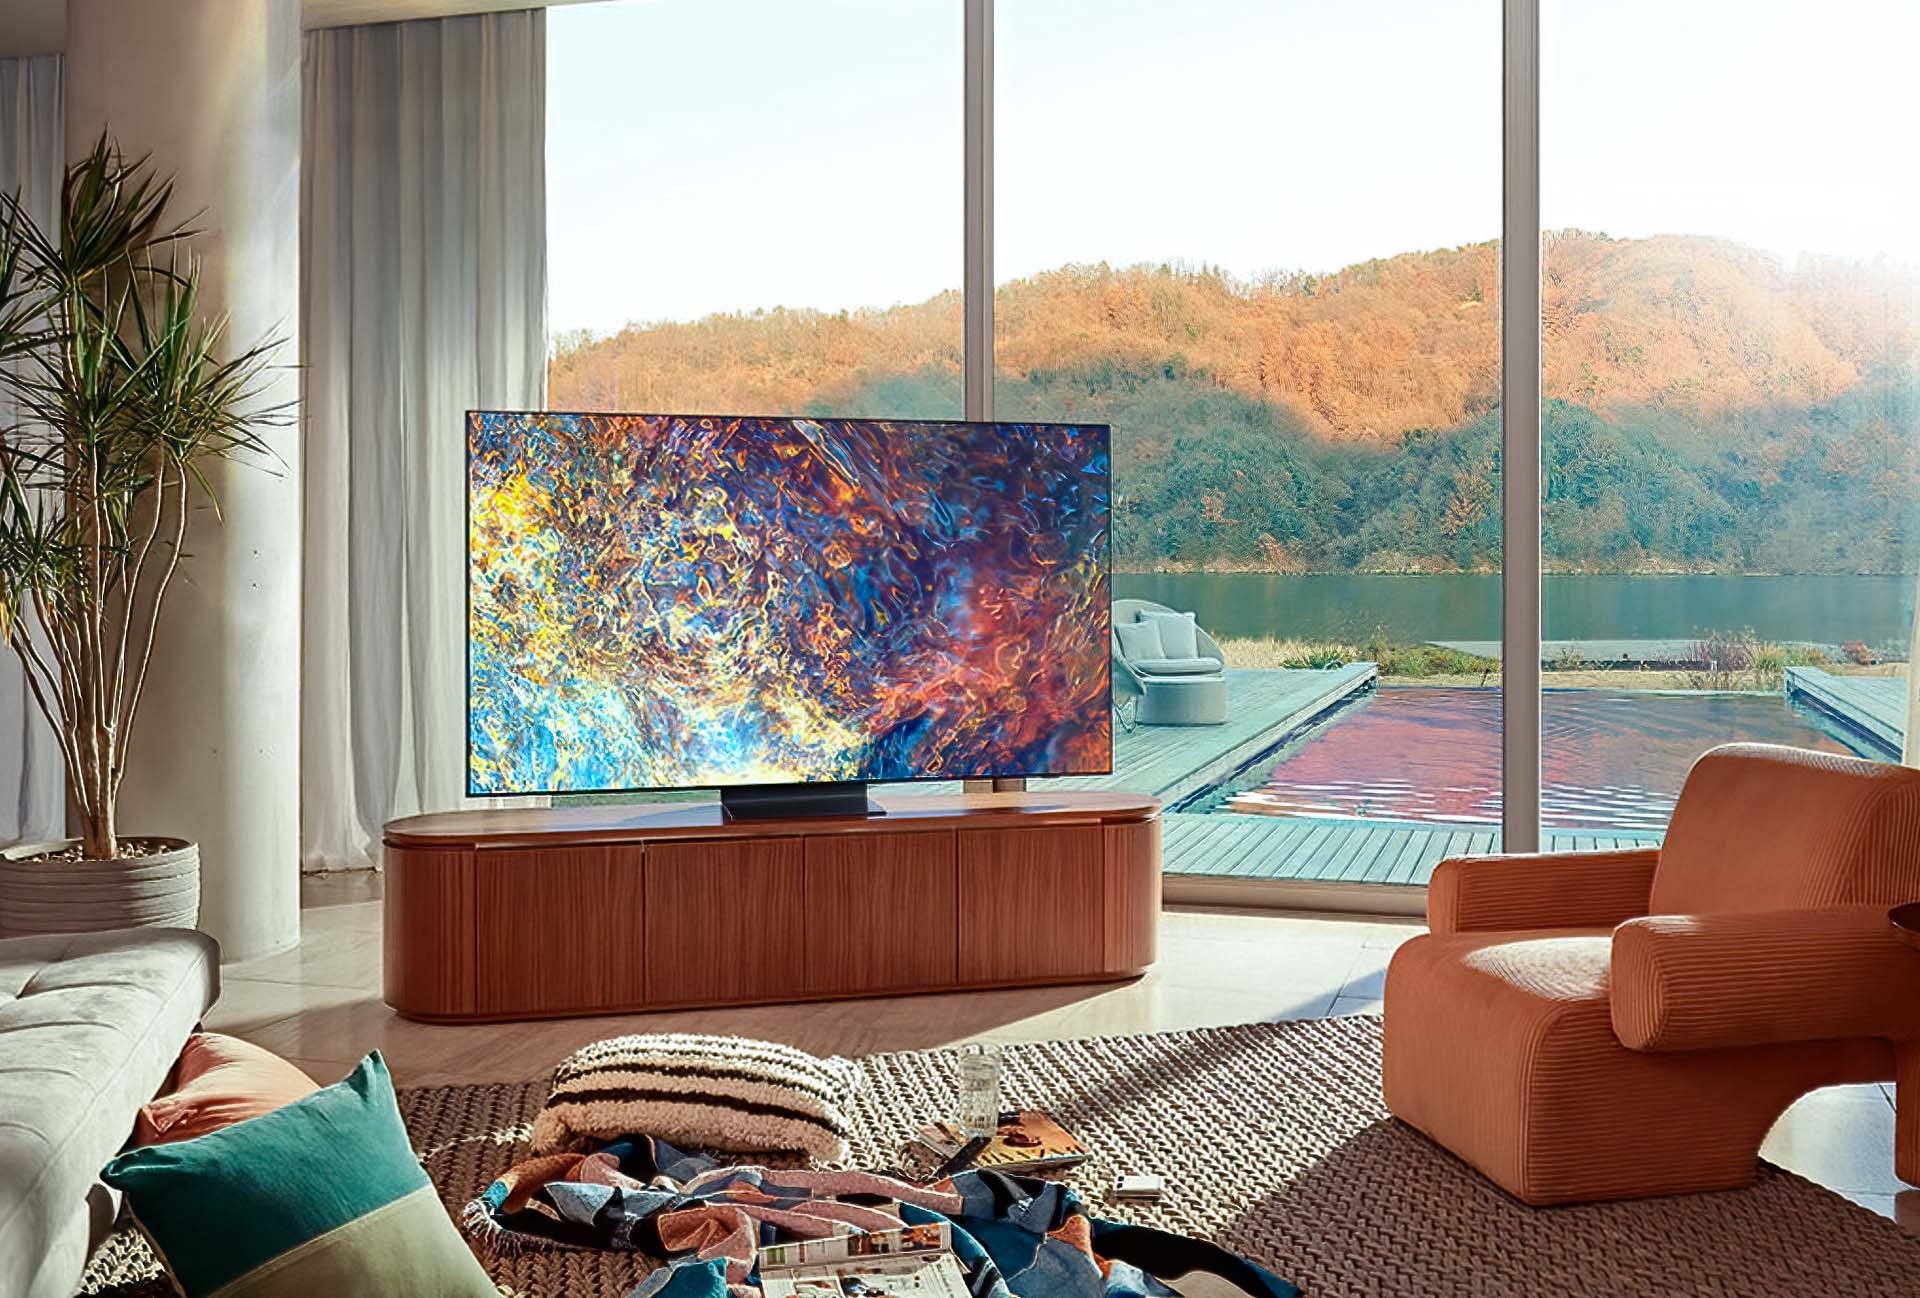 Get a deal on better TV sound. ddfde5a1 samsung tv best of the year